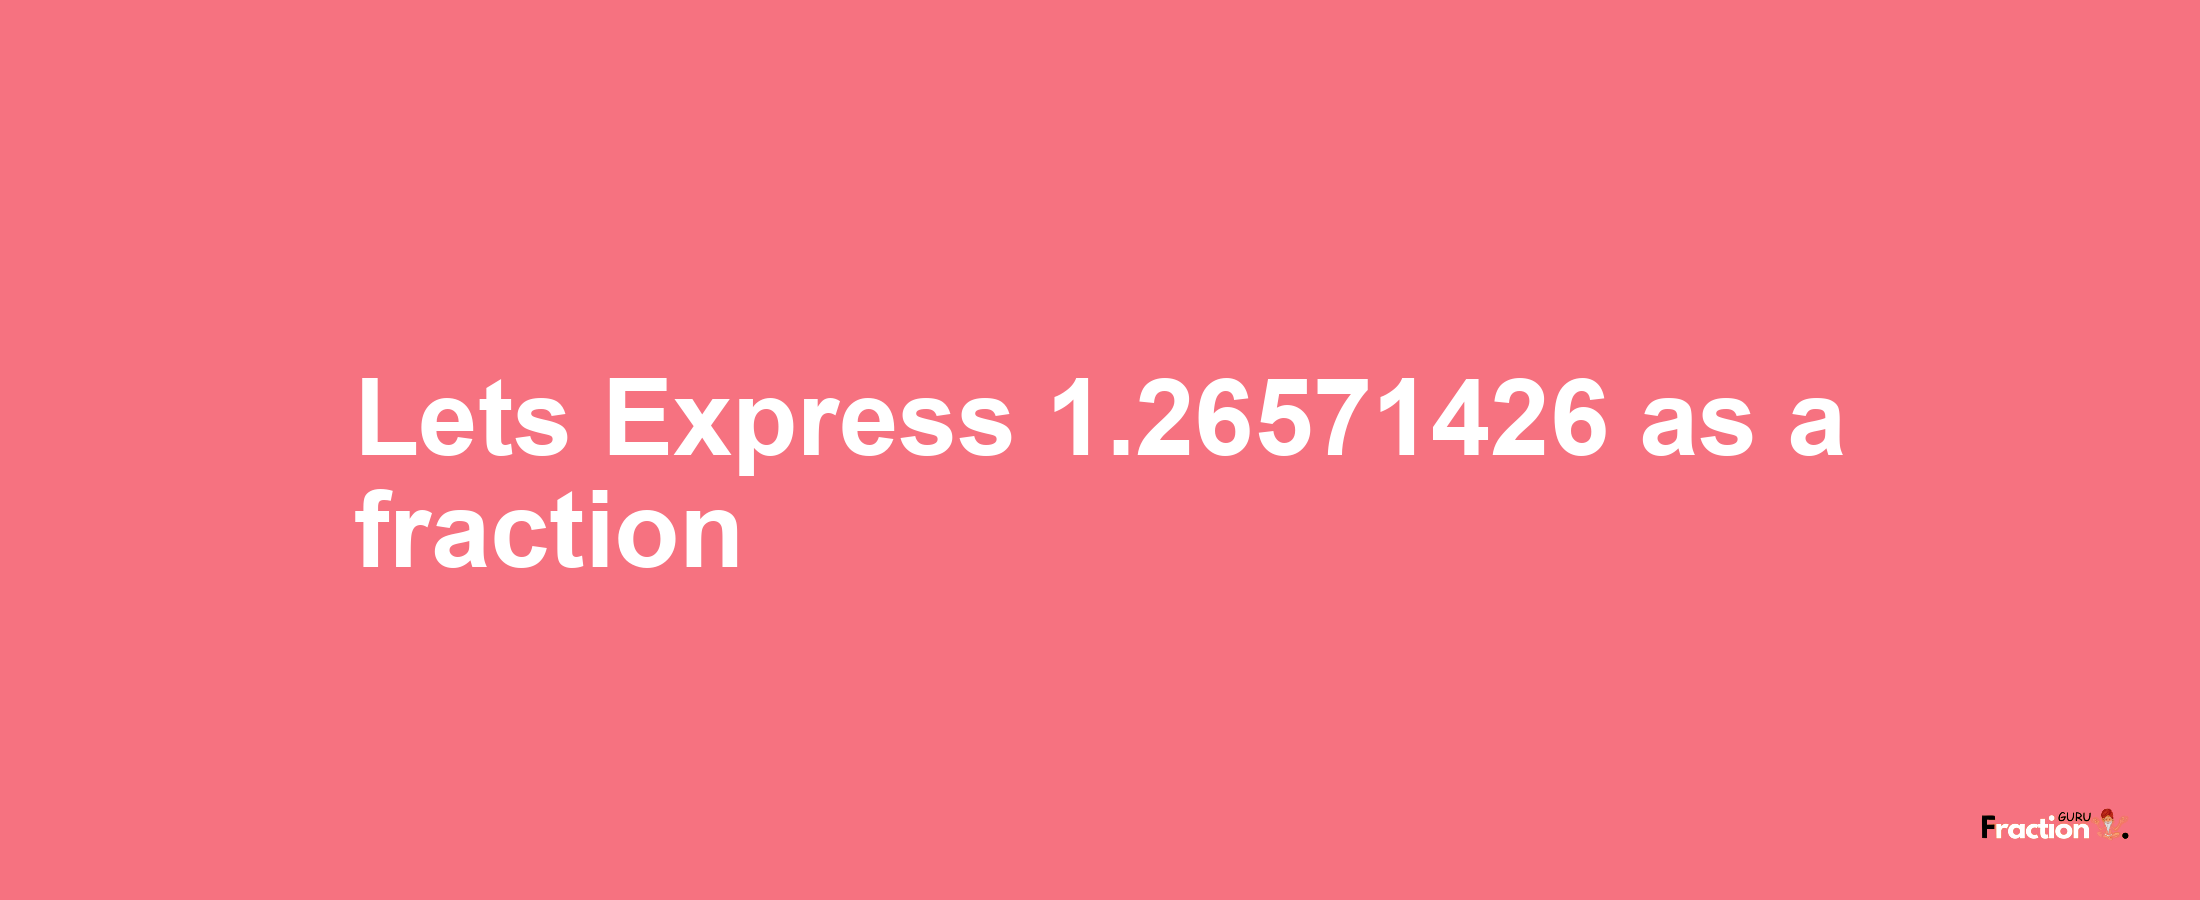 Lets Express 1.26571426 as afraction